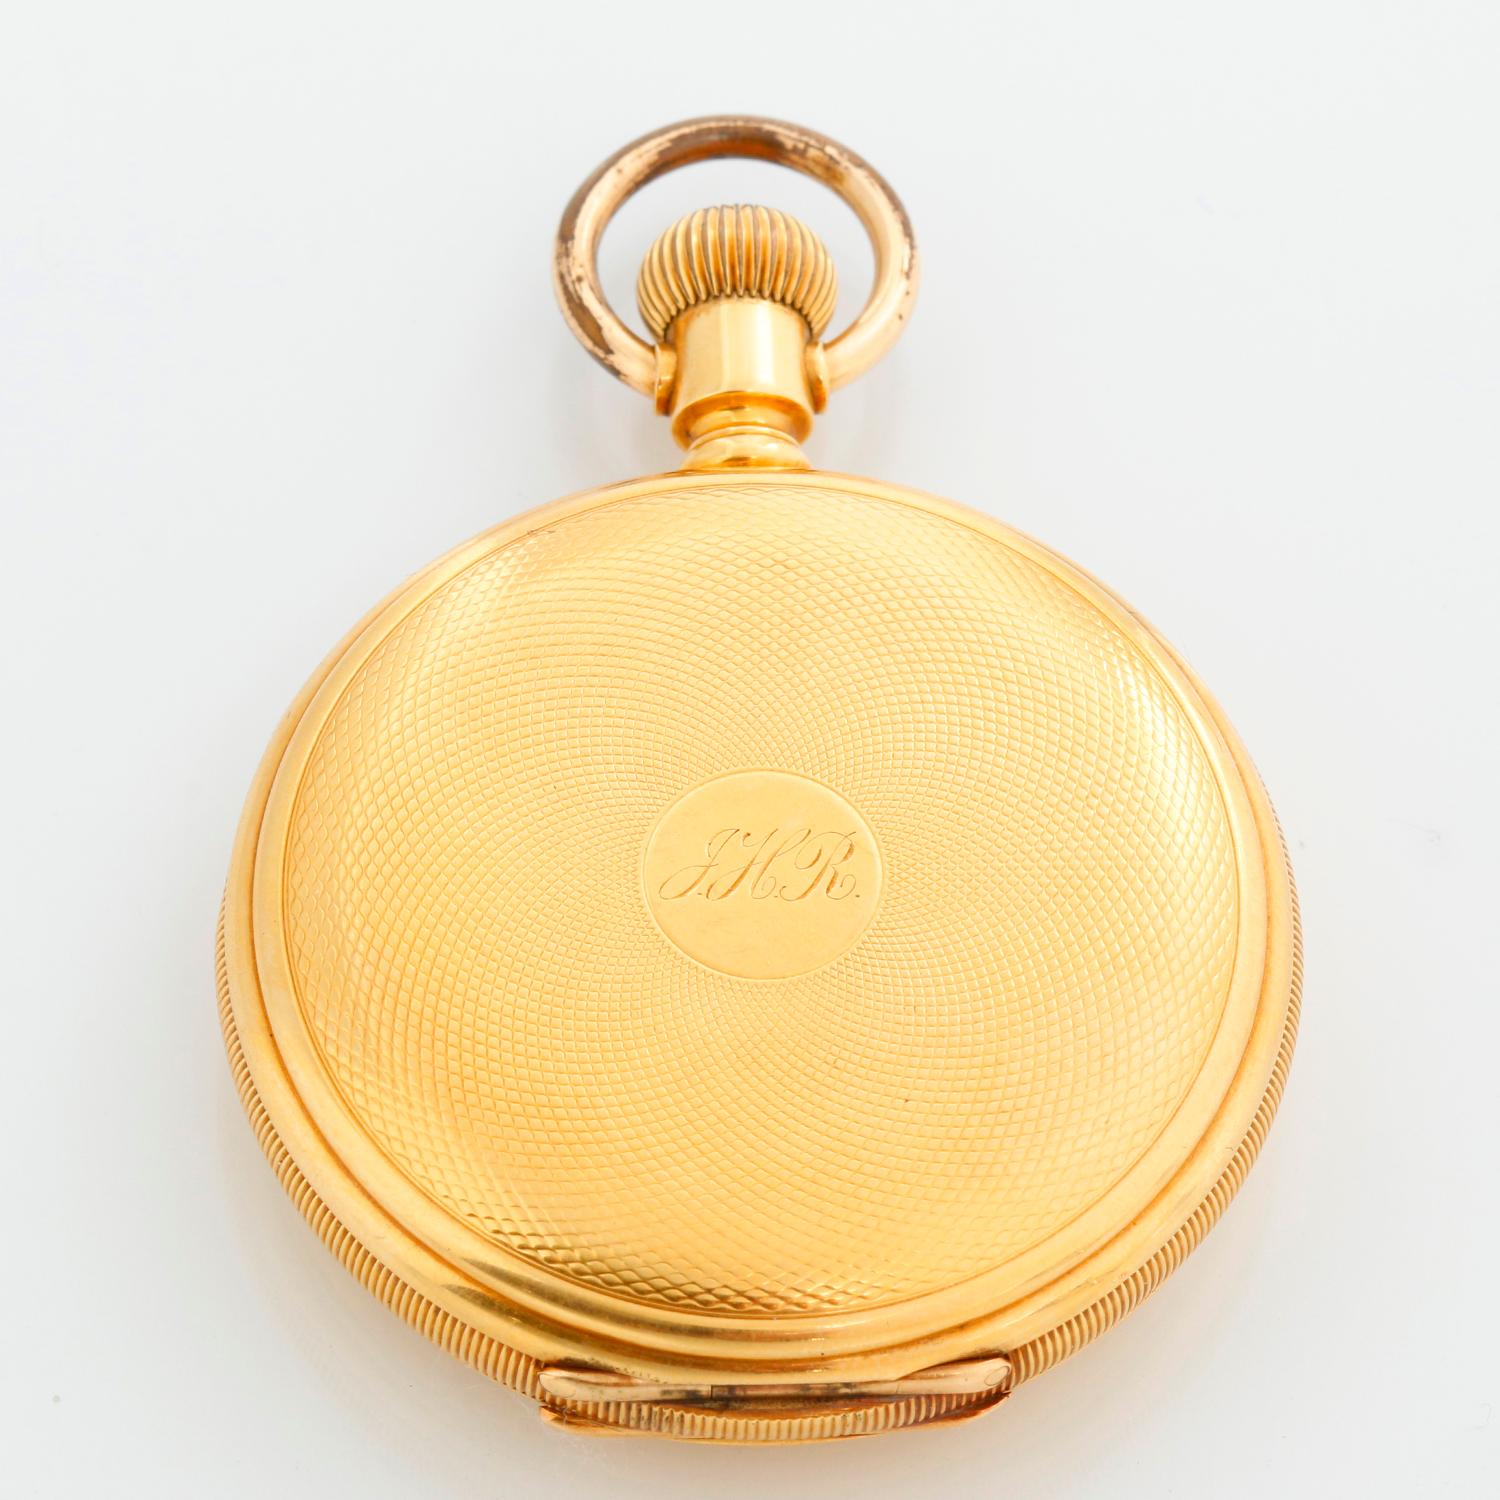 R. Lannier 18k Yellow Gold Men's Pocket Watch In Good Condition For Sale In Dallas, TX